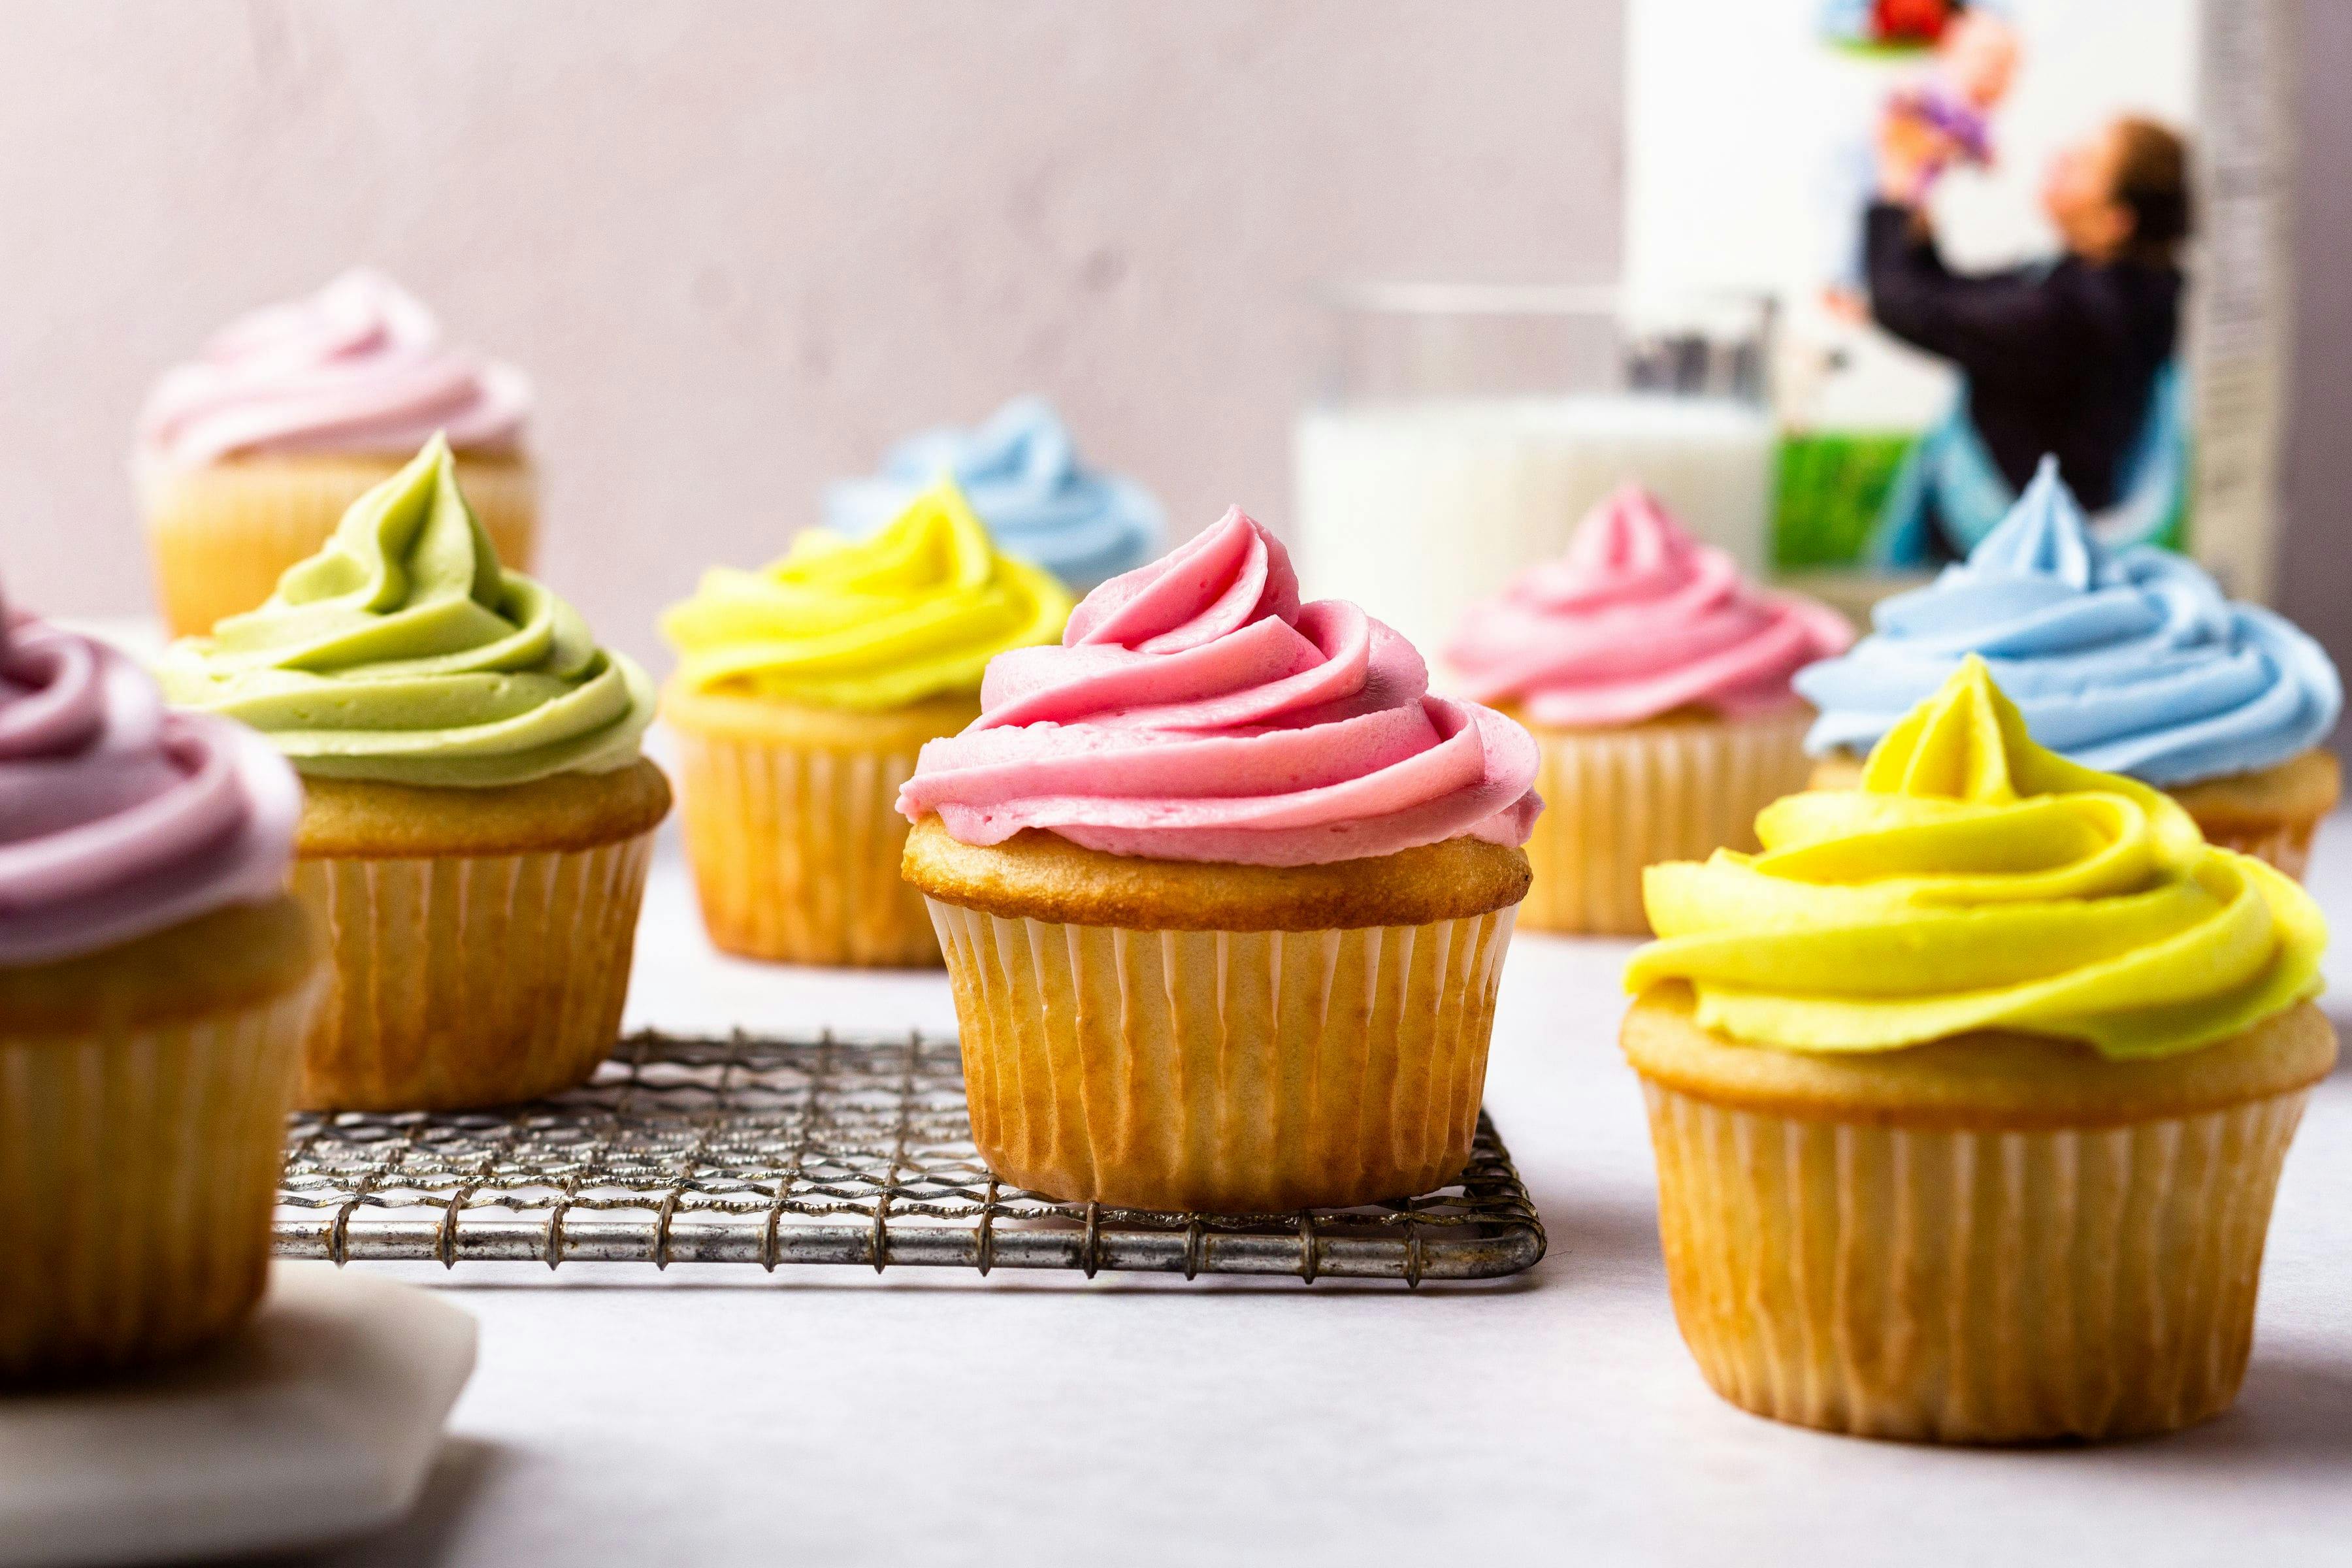 How To Color Icing Without Food Coloring (Plant-Based) - Cooking With Elo